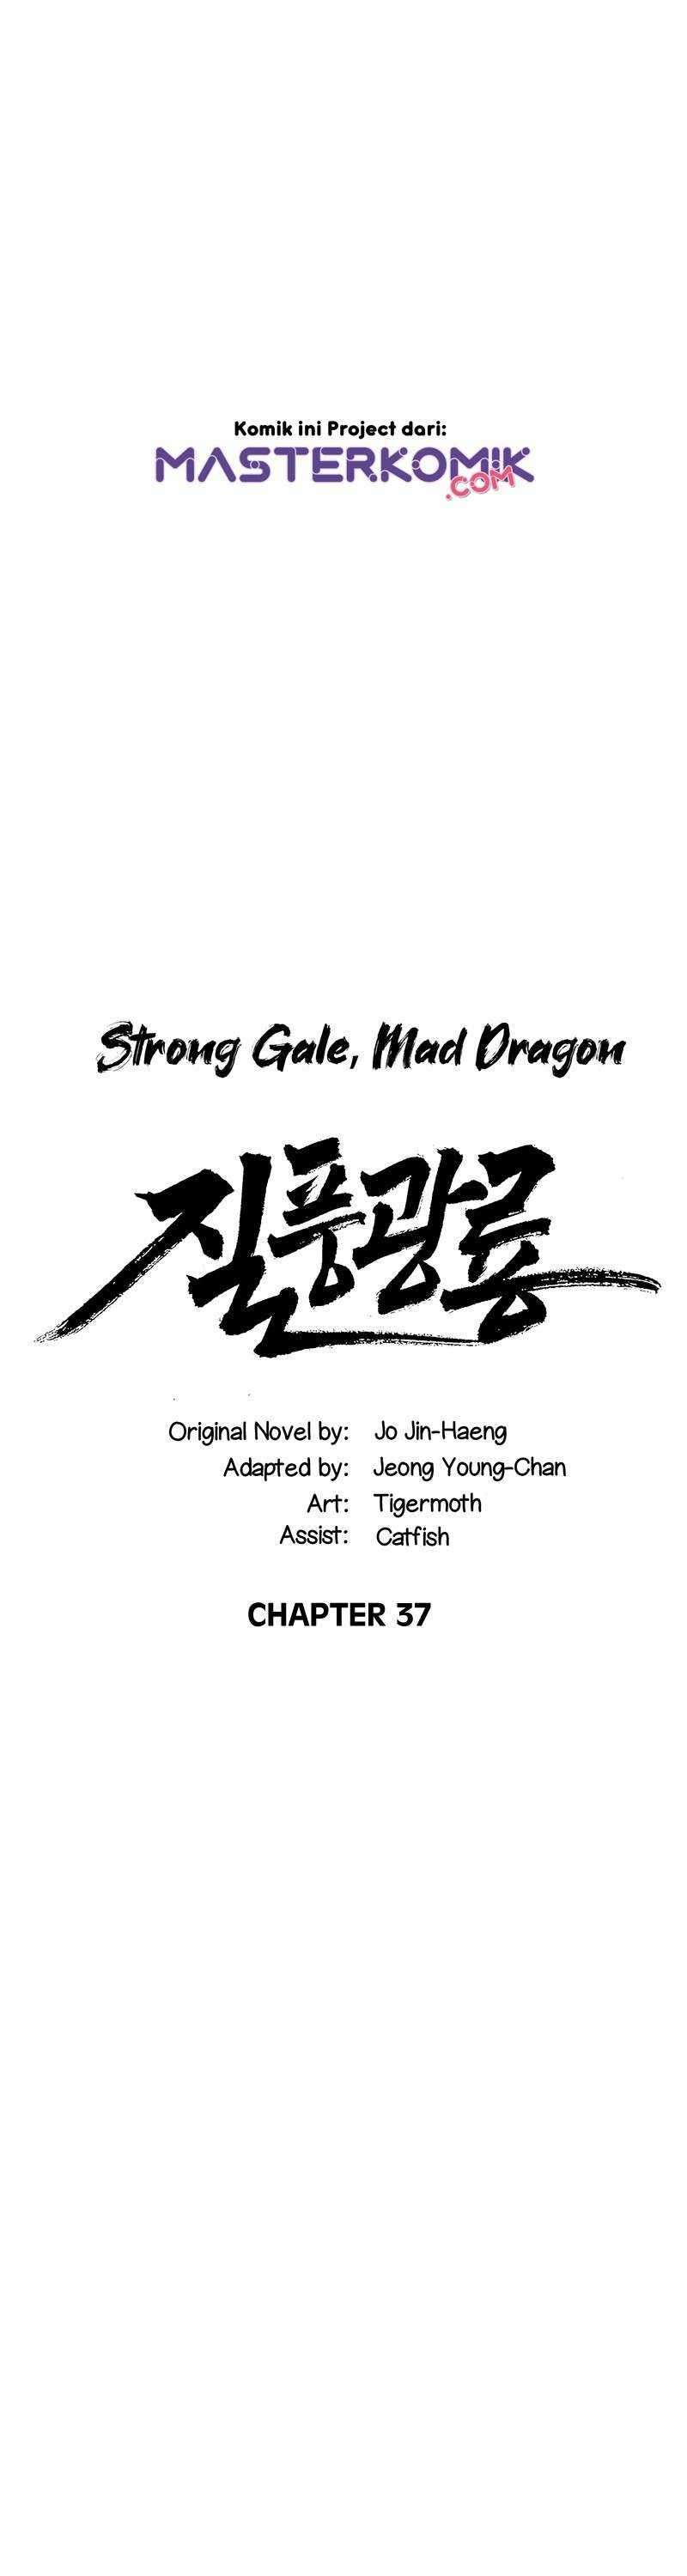 Strong Gale, Mad Dragon Chapter 37